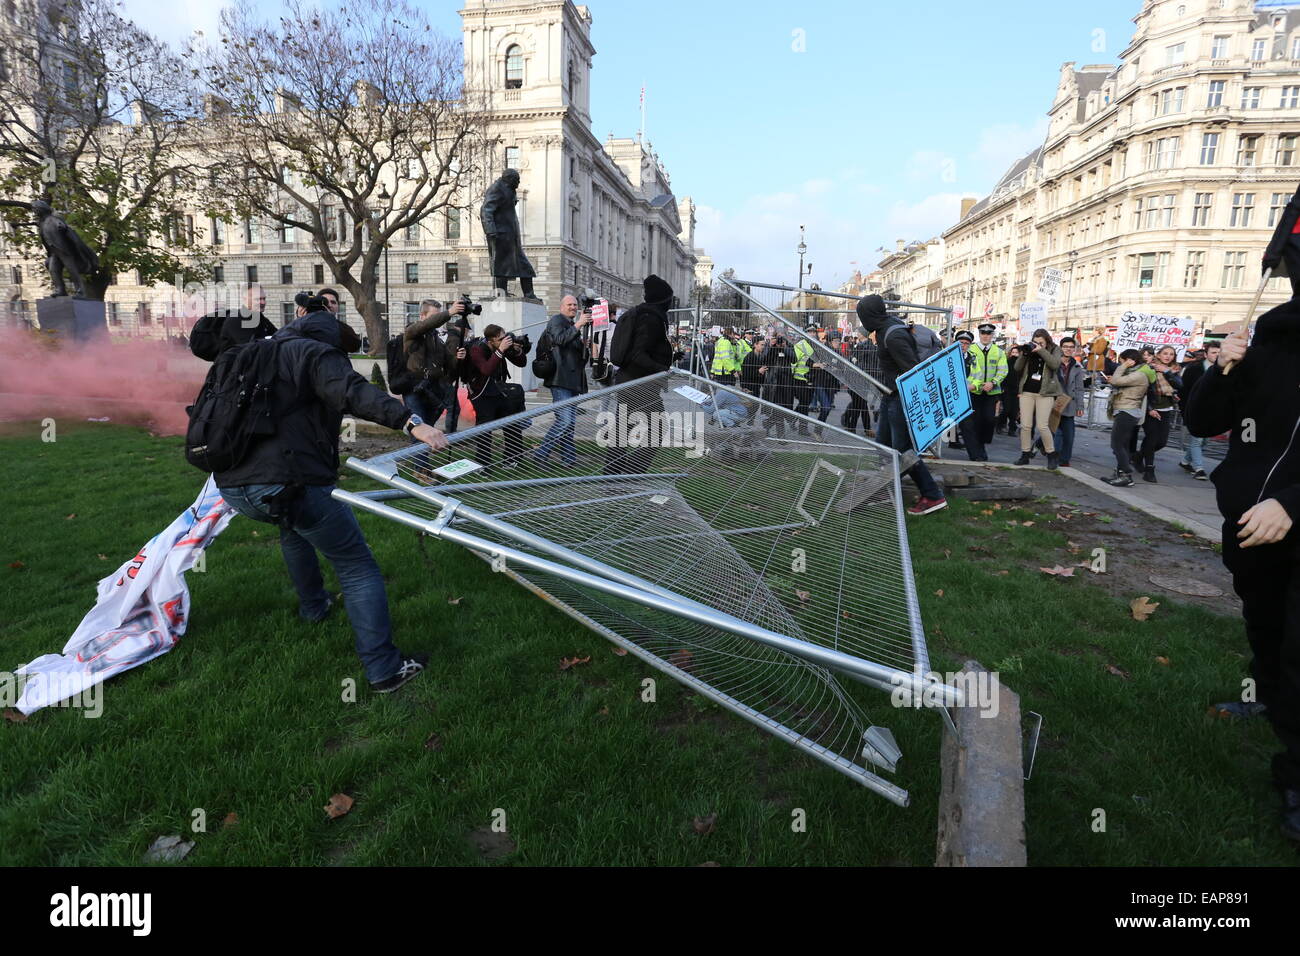 London, UK. 19th Nov, 2014. Students tear down fences at Parliament Square. Thousands of students are marching in central London calling for Free Education. Credit:  Christopher Middleton/Alamy Live News Stock Photo